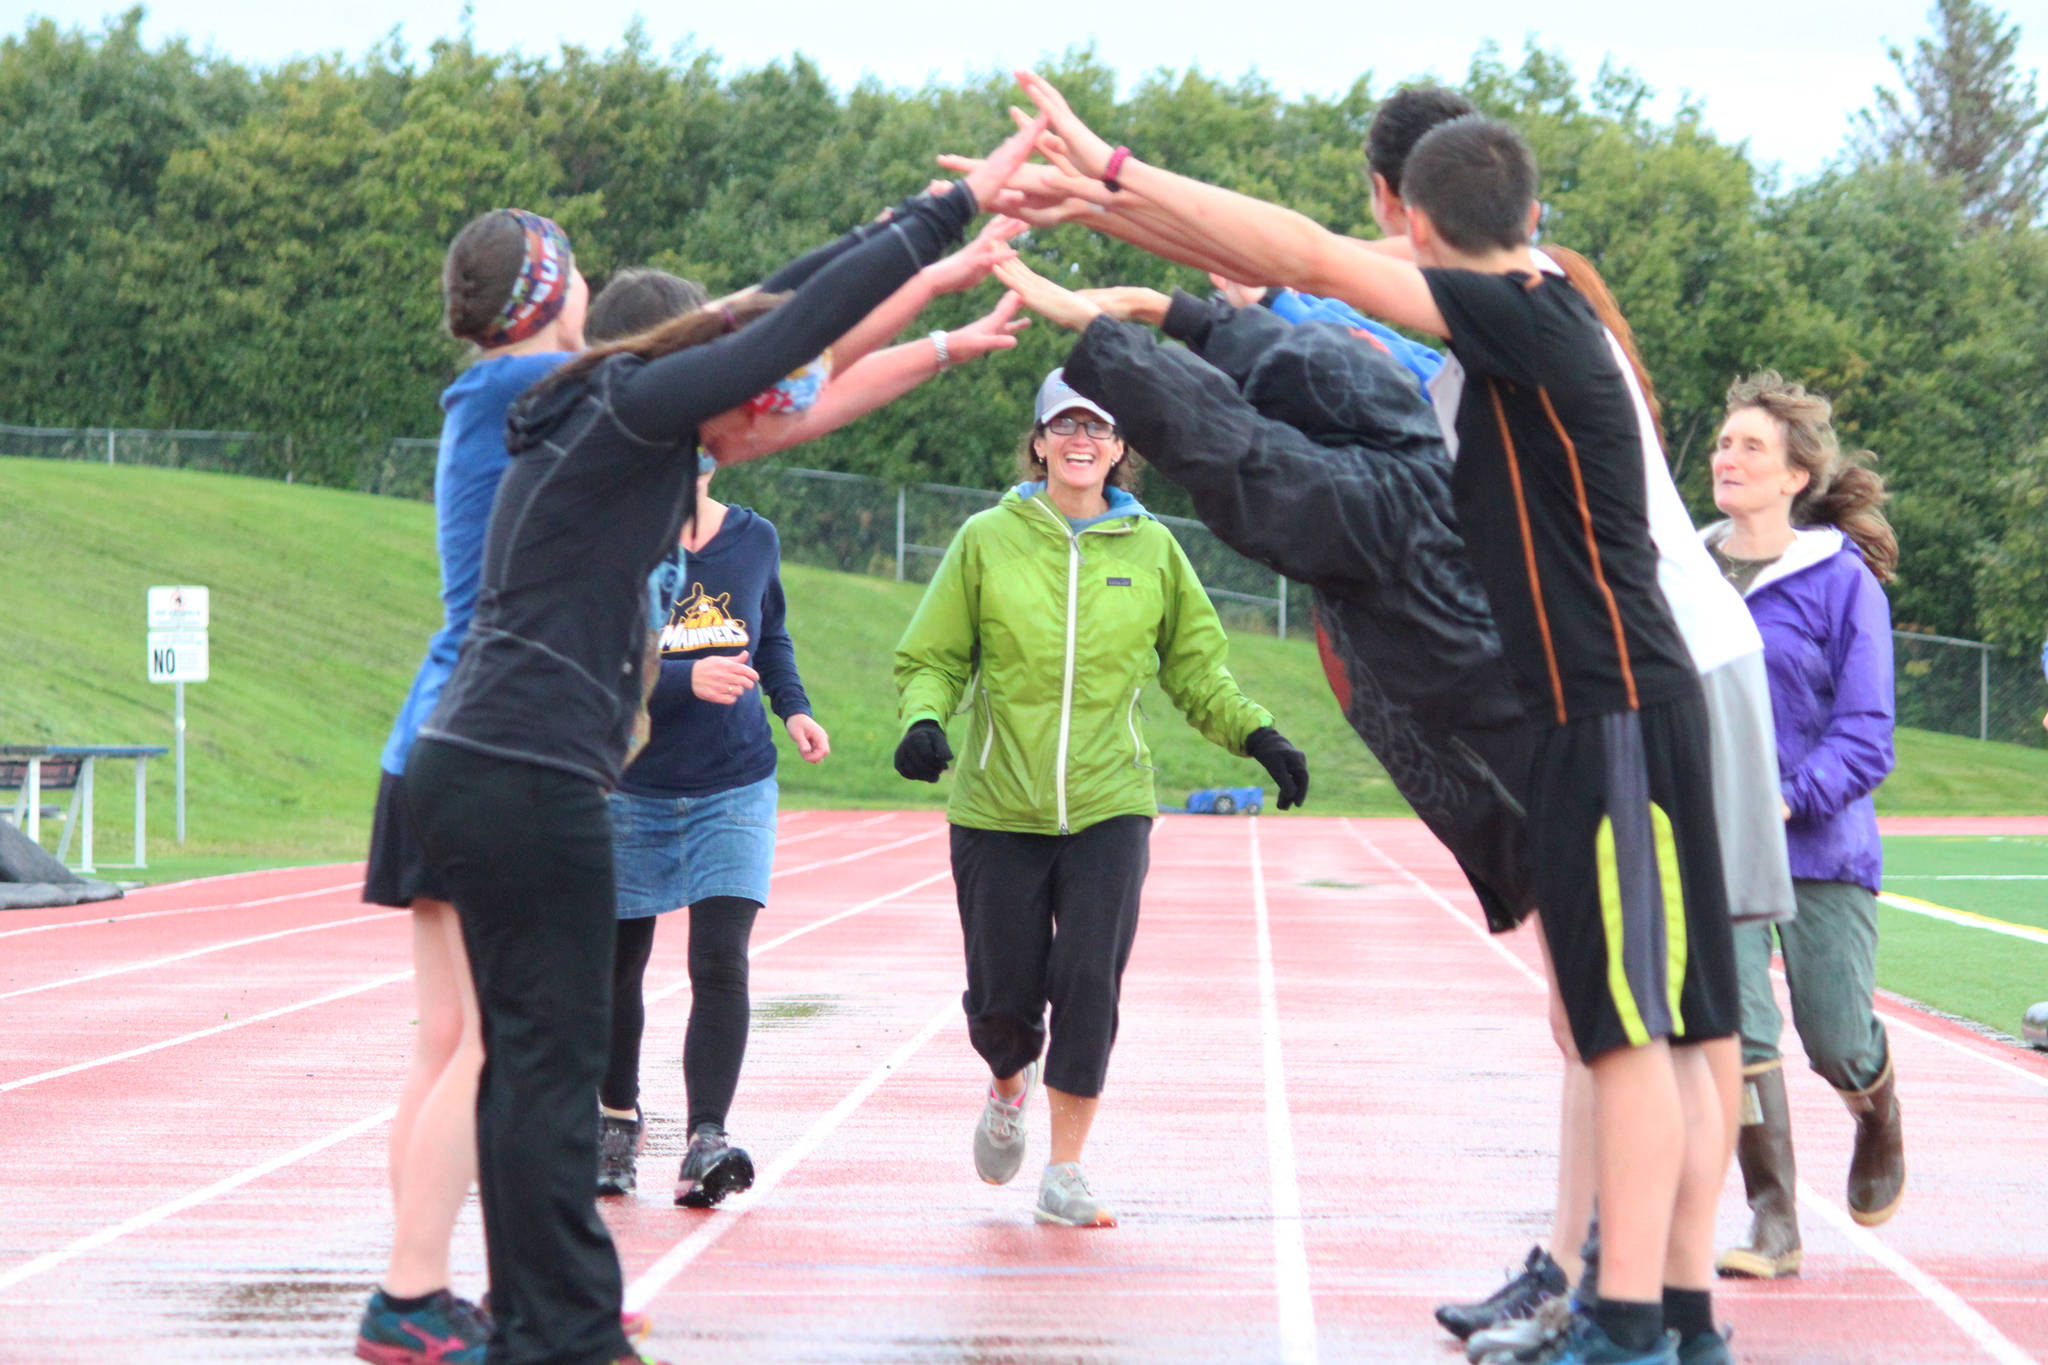 Saundra Hudson, an active member of and advocator for the Homer running community and teacher at Homer High School, runs under a human bridge during the Mariner Mile event Thursday, Sept. 14, 2017 at the high school track in Homer, Alaska. Hudson experienced a head injury when she slipped on the ice running this past March, and Thursday’s fundraising event for the Kachemak Bay Running Club was the first time she’s run in six months. (Photo by Megan Pacer/Homer News)